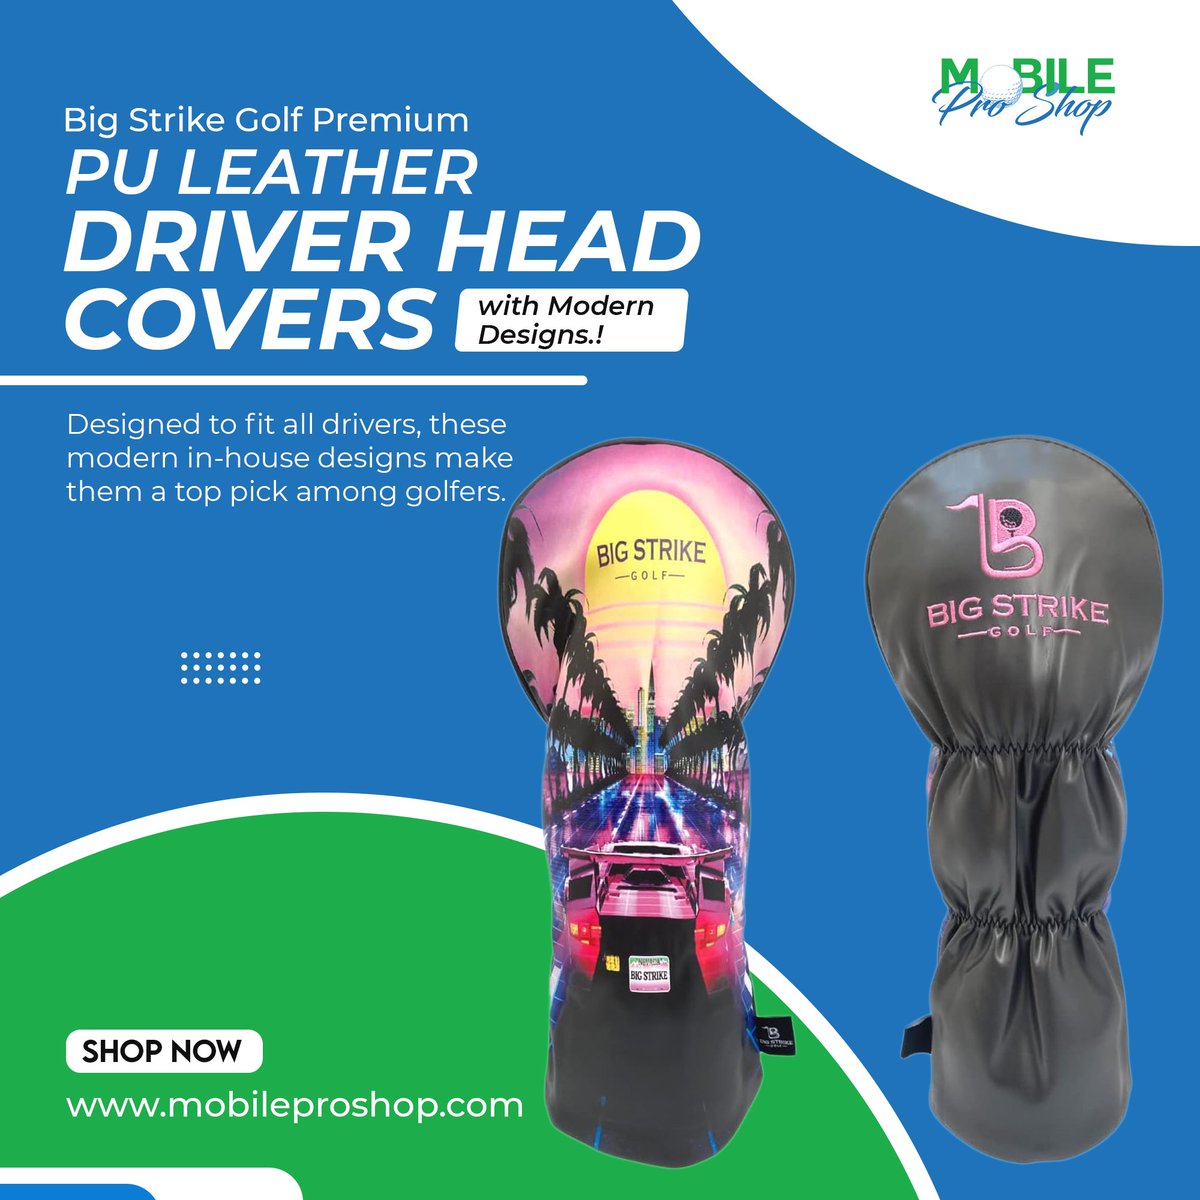 Big Strike Golf Premium PU Leather Driver Head Covers with Modern Designs. By Mobile Pro Shop !

#MobileProShop #BigStrikeGolf #GolfHeadcovers #PremiumLeather #DriverCovers #GolfEssentials #ModernDesigns #GolfersChoice #VelvetLining #GolfAccessories